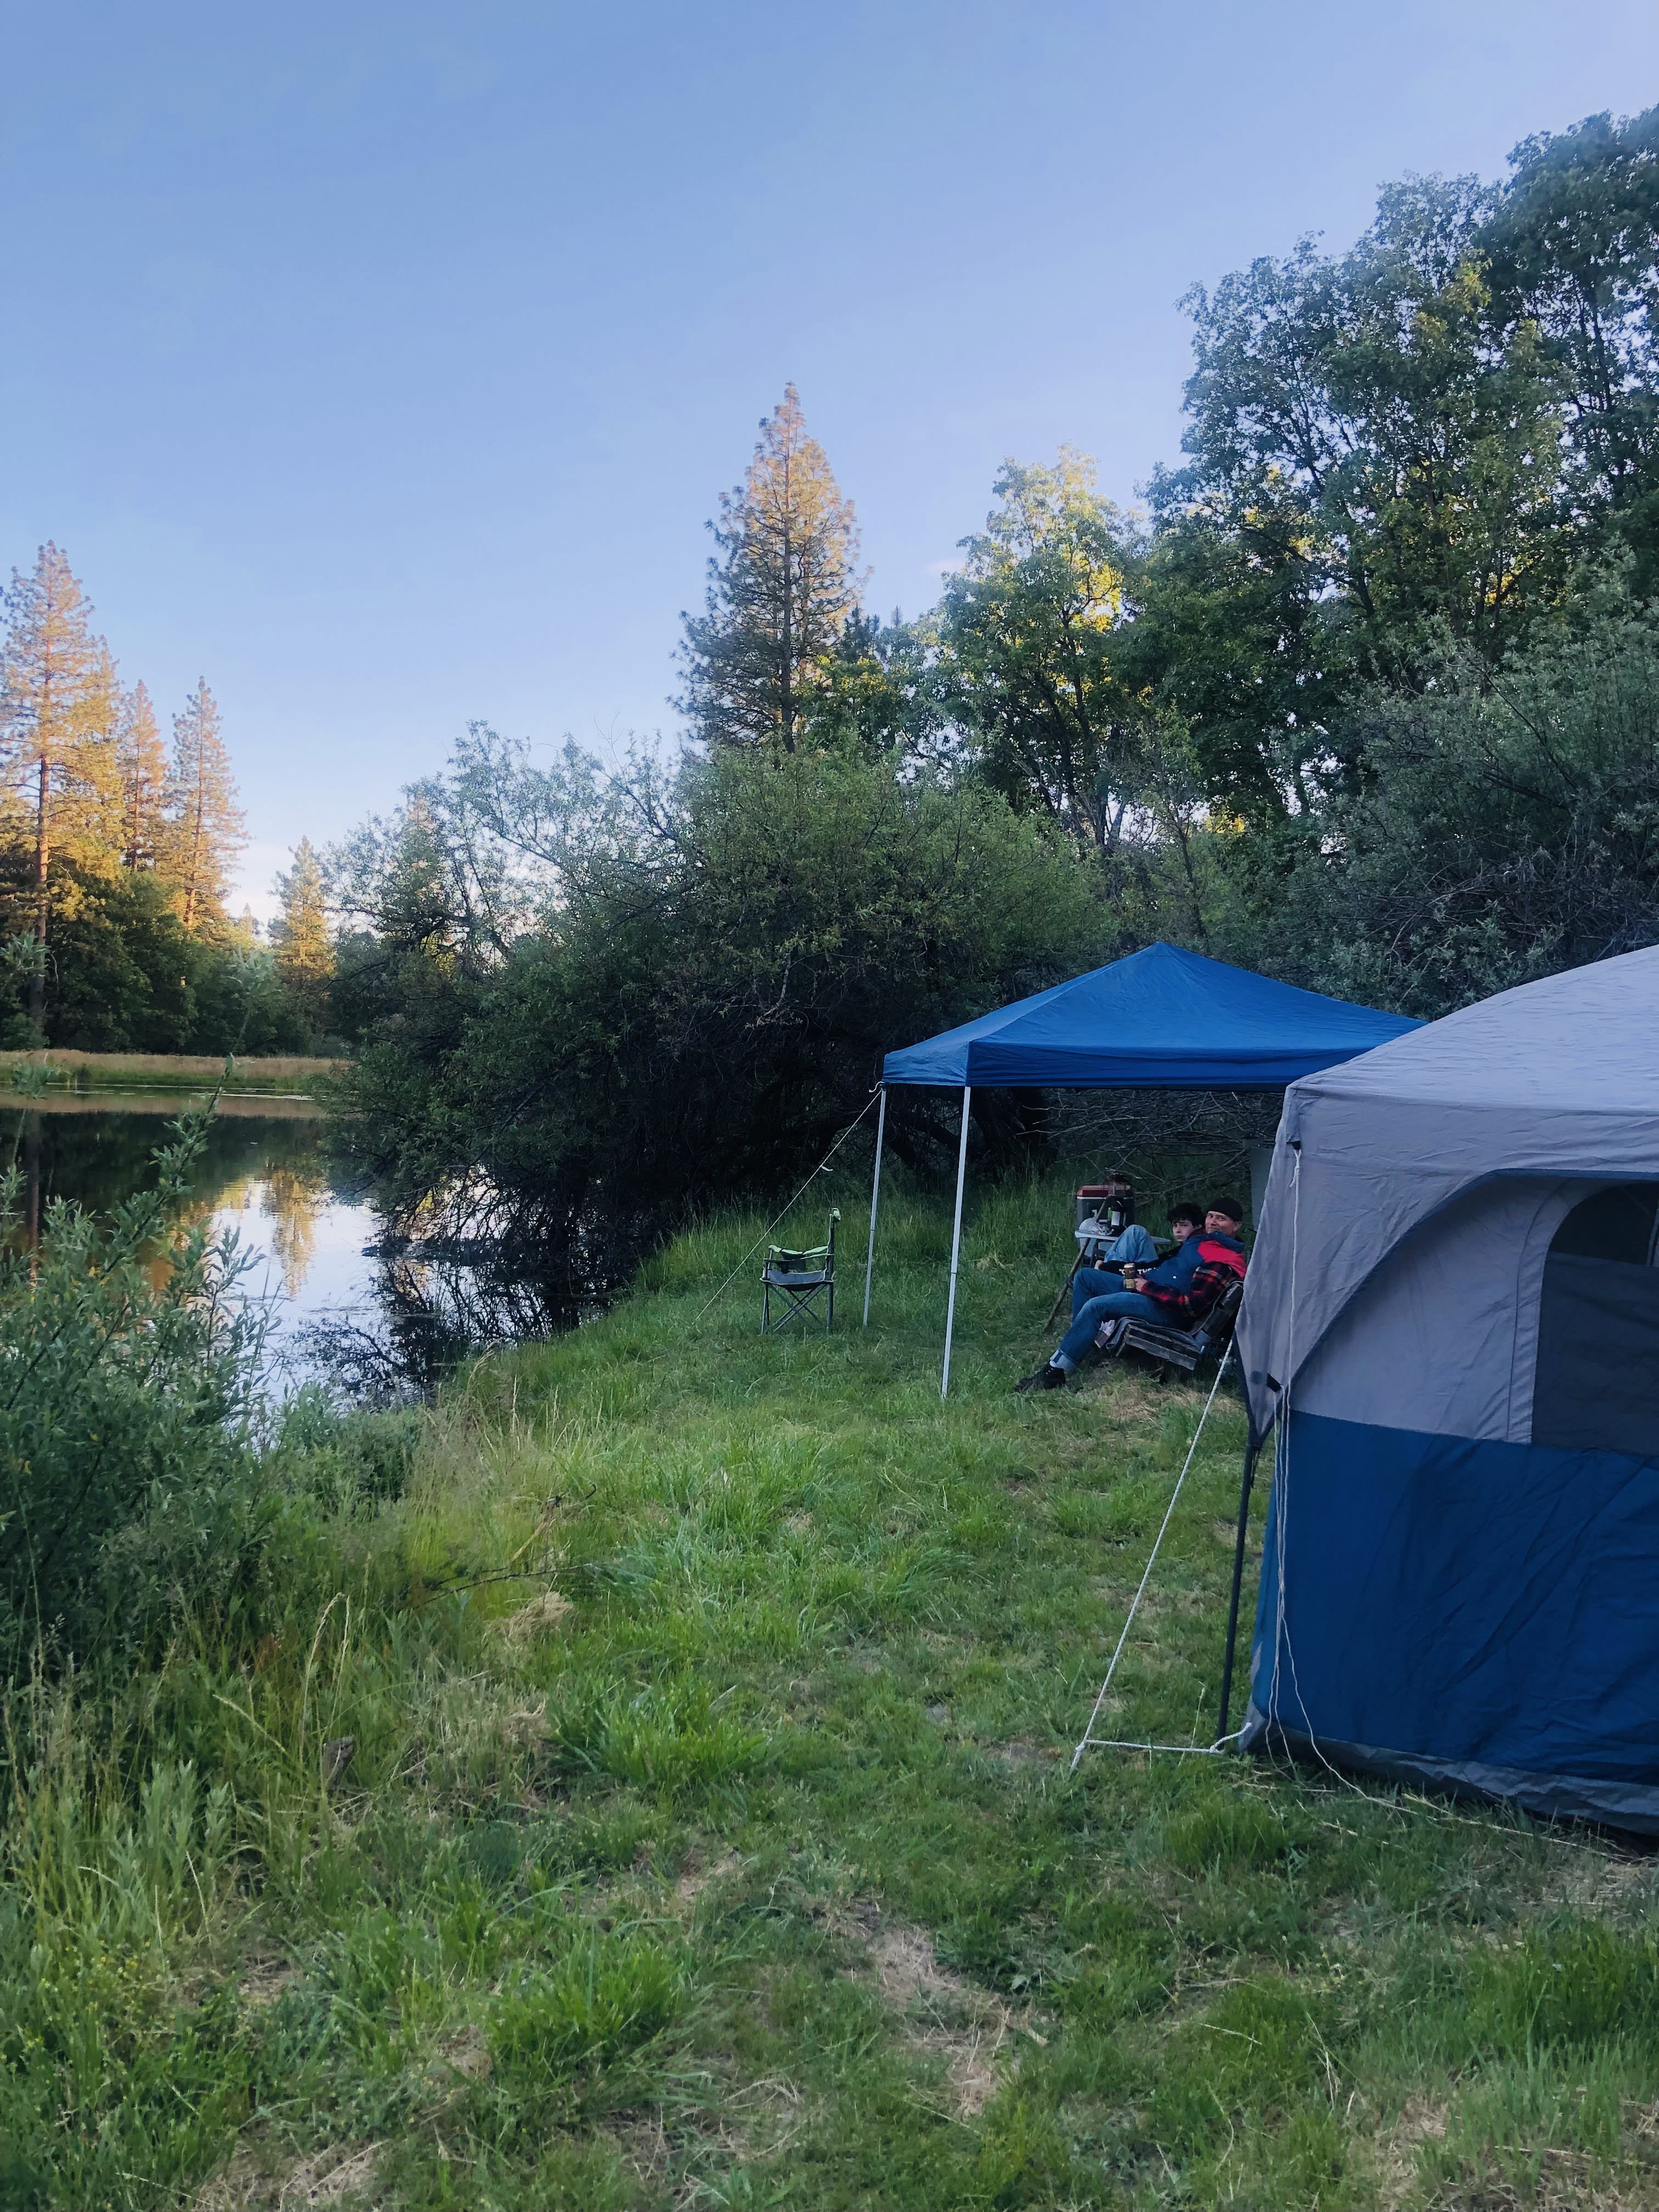 Camp site by the pond.